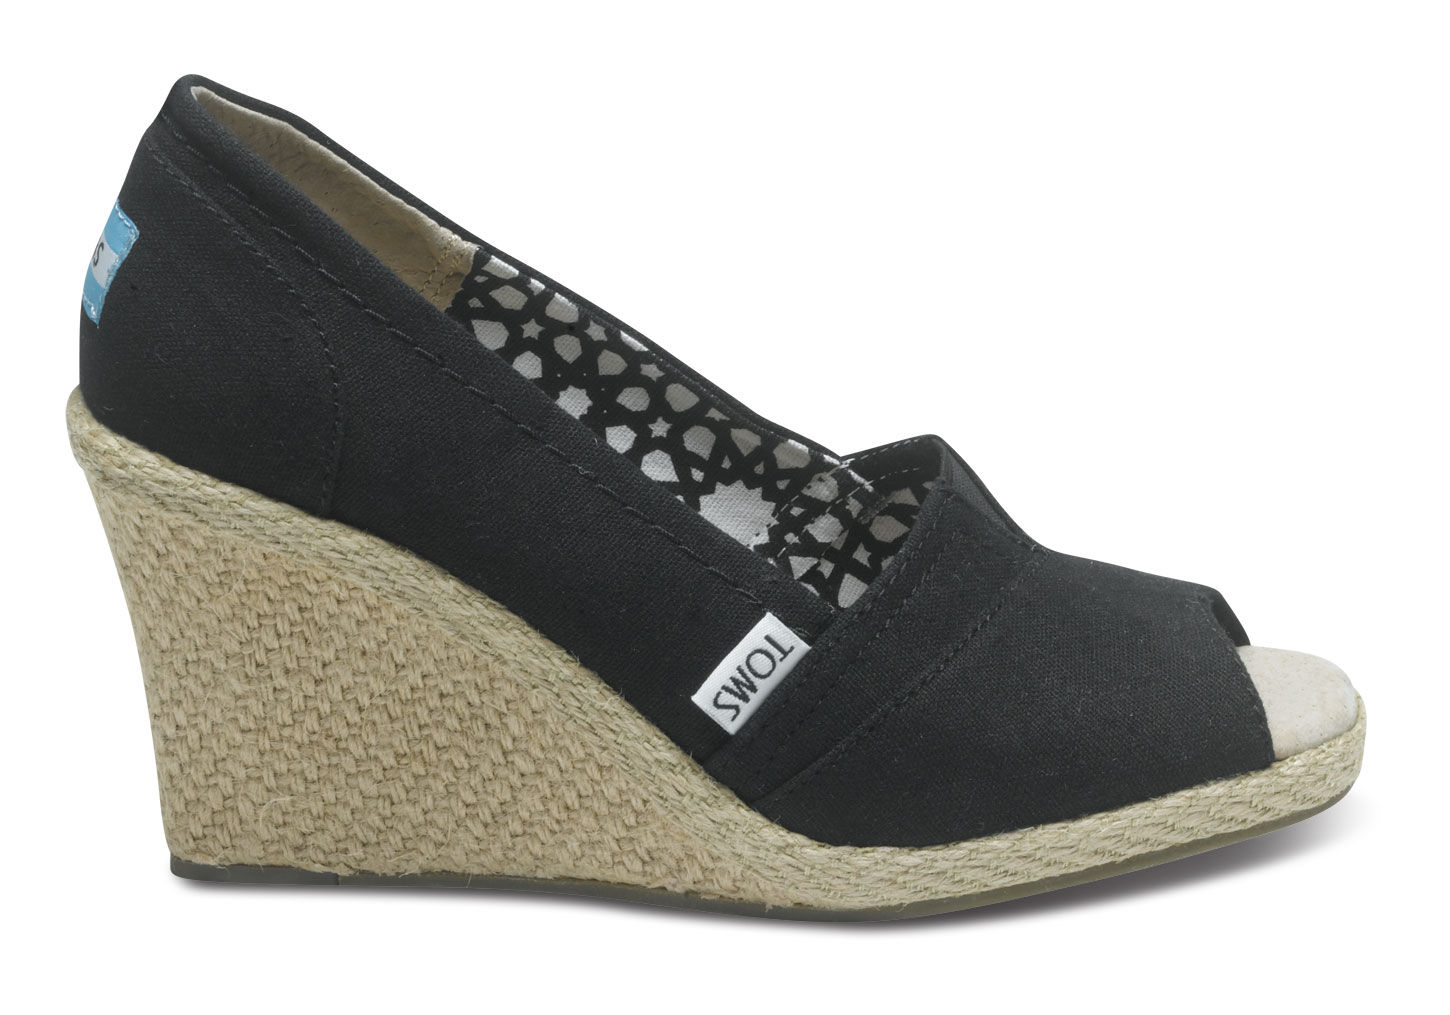 ... boutik: Restocked in the TOMS classic black wedge @ 175 Water St